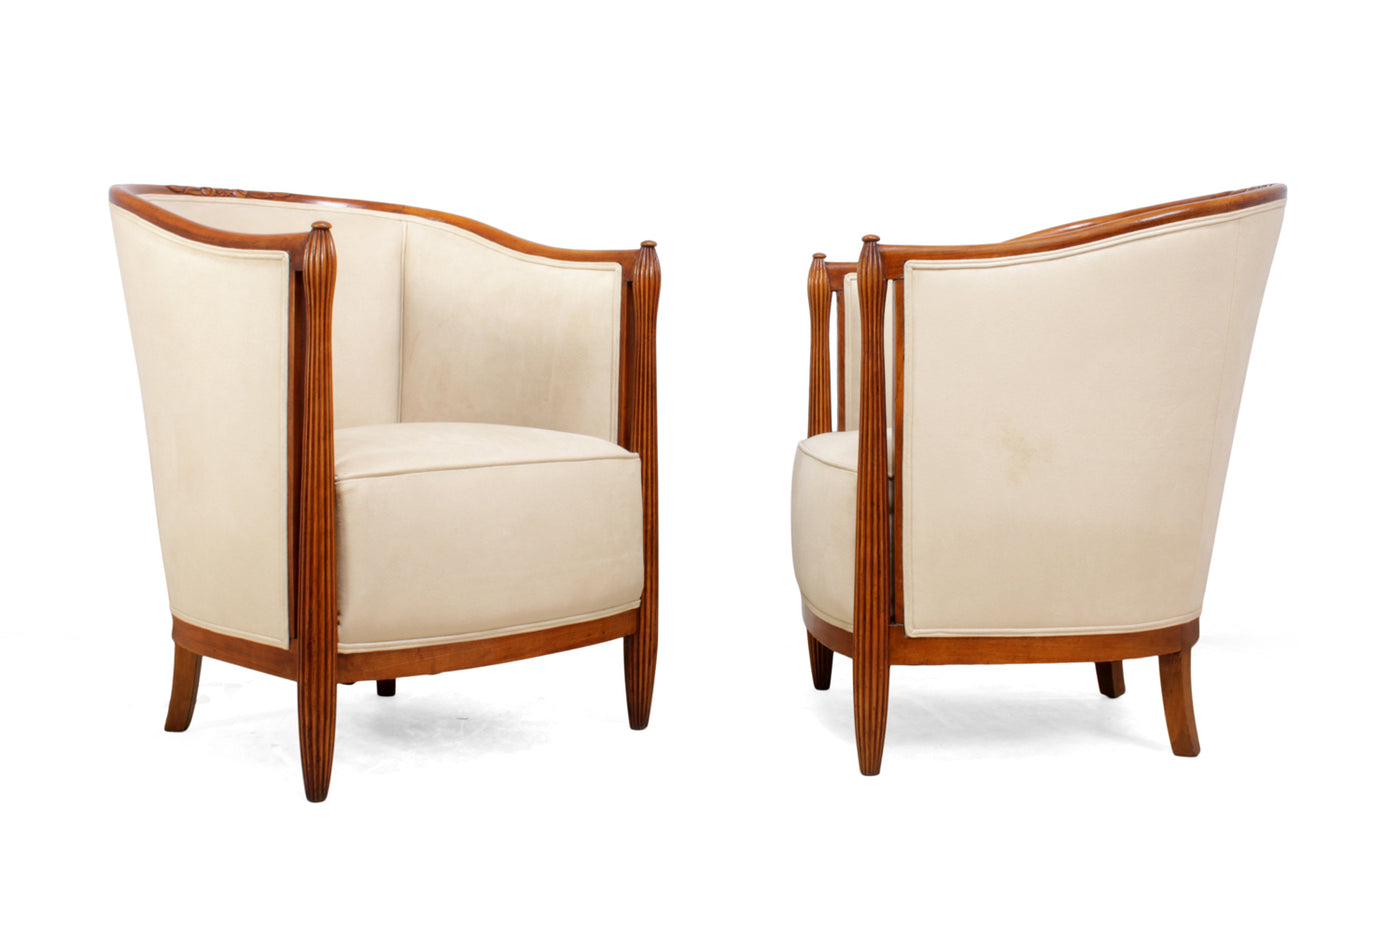 A Pair of French Art Deco Salon Chairs by Paul Folllot c1925